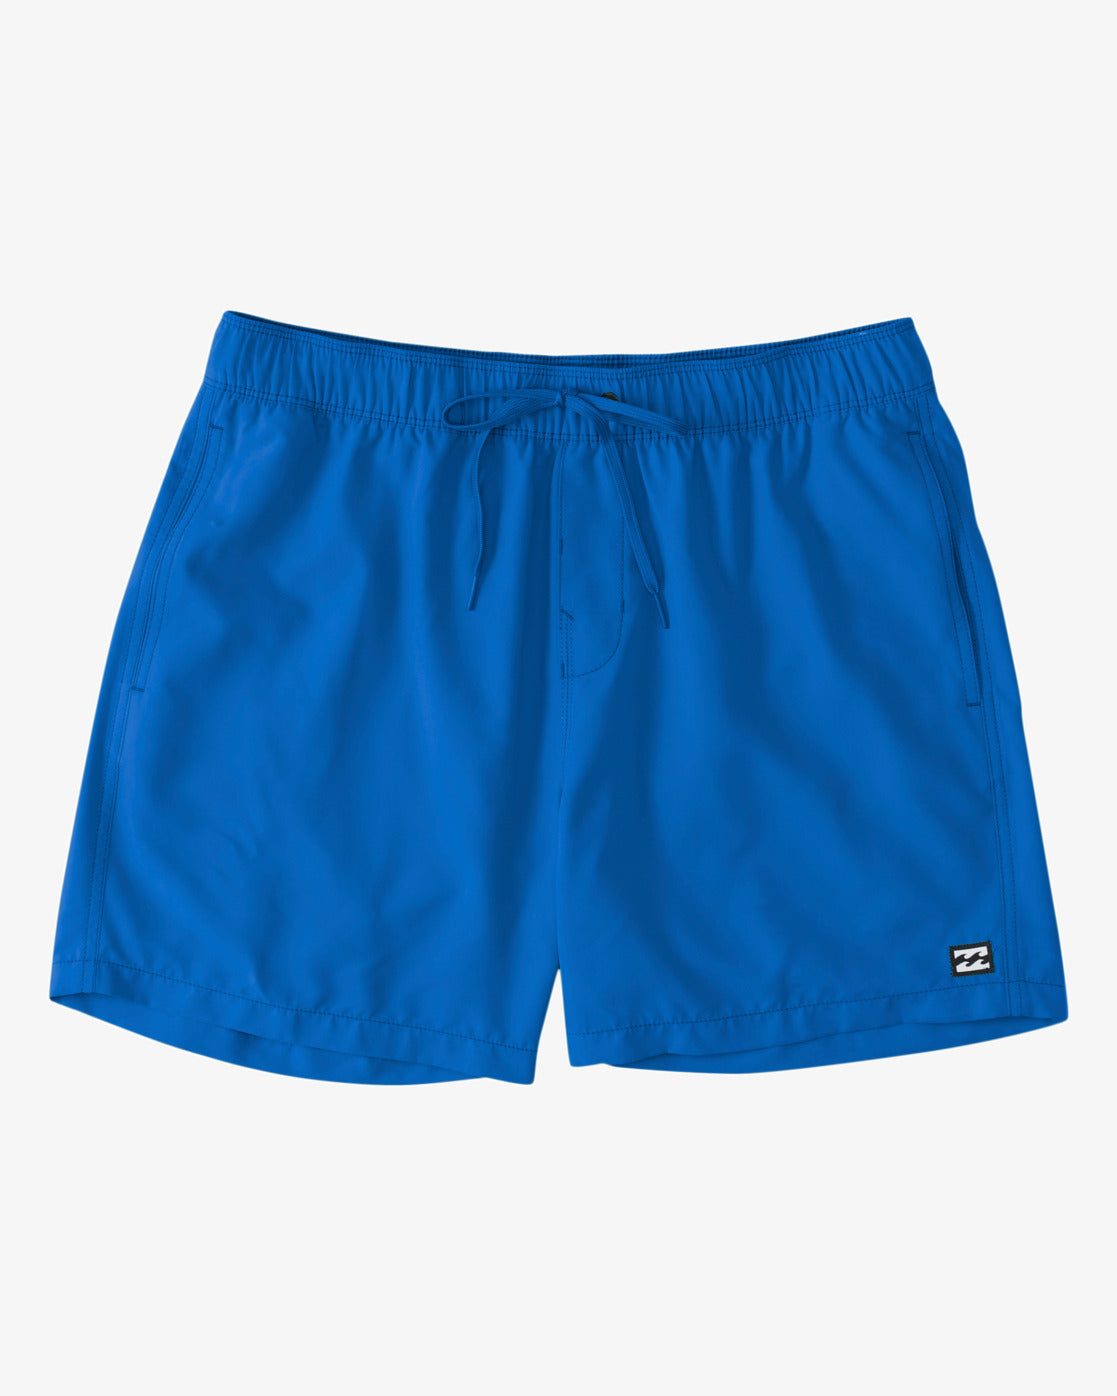 All Day Layback 16 Boardshorts - Cobalt